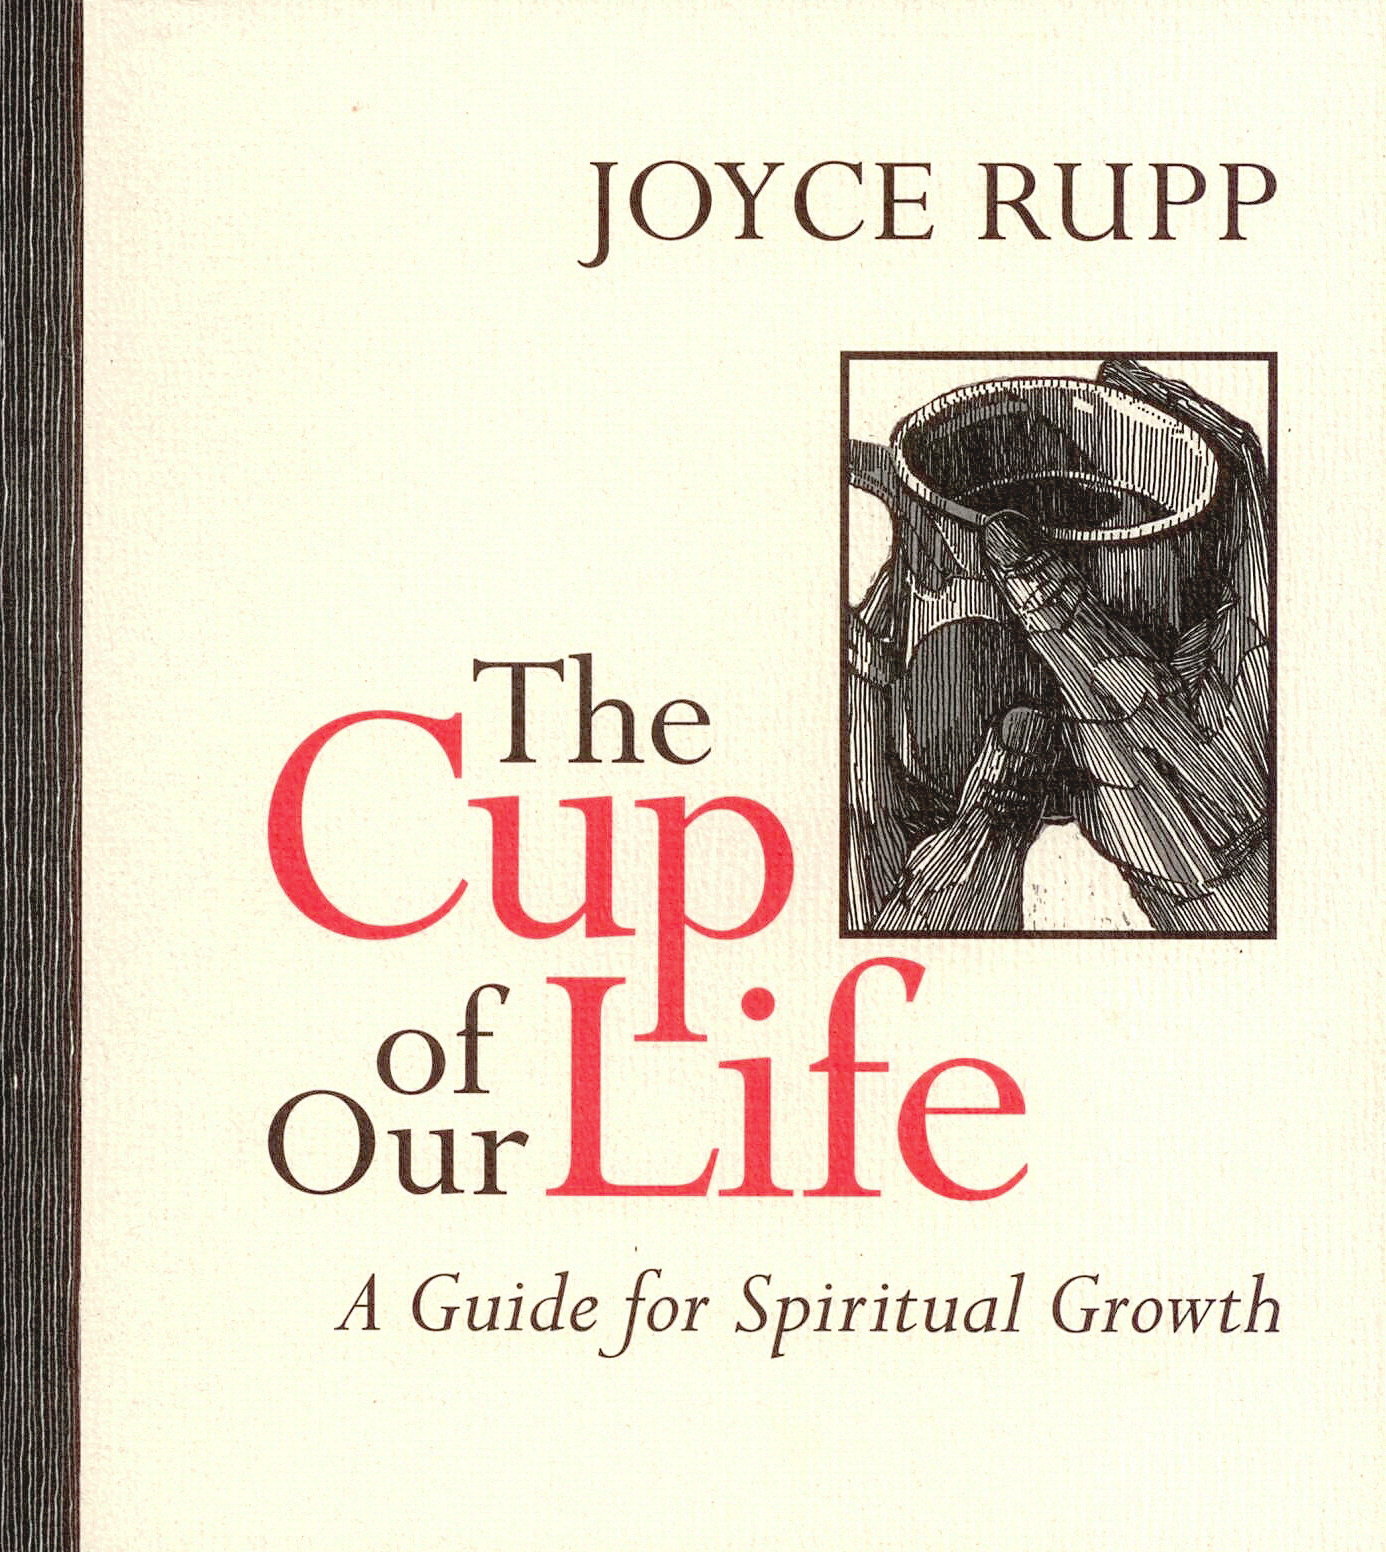 The Cup of Our Life by Joyce Rupp